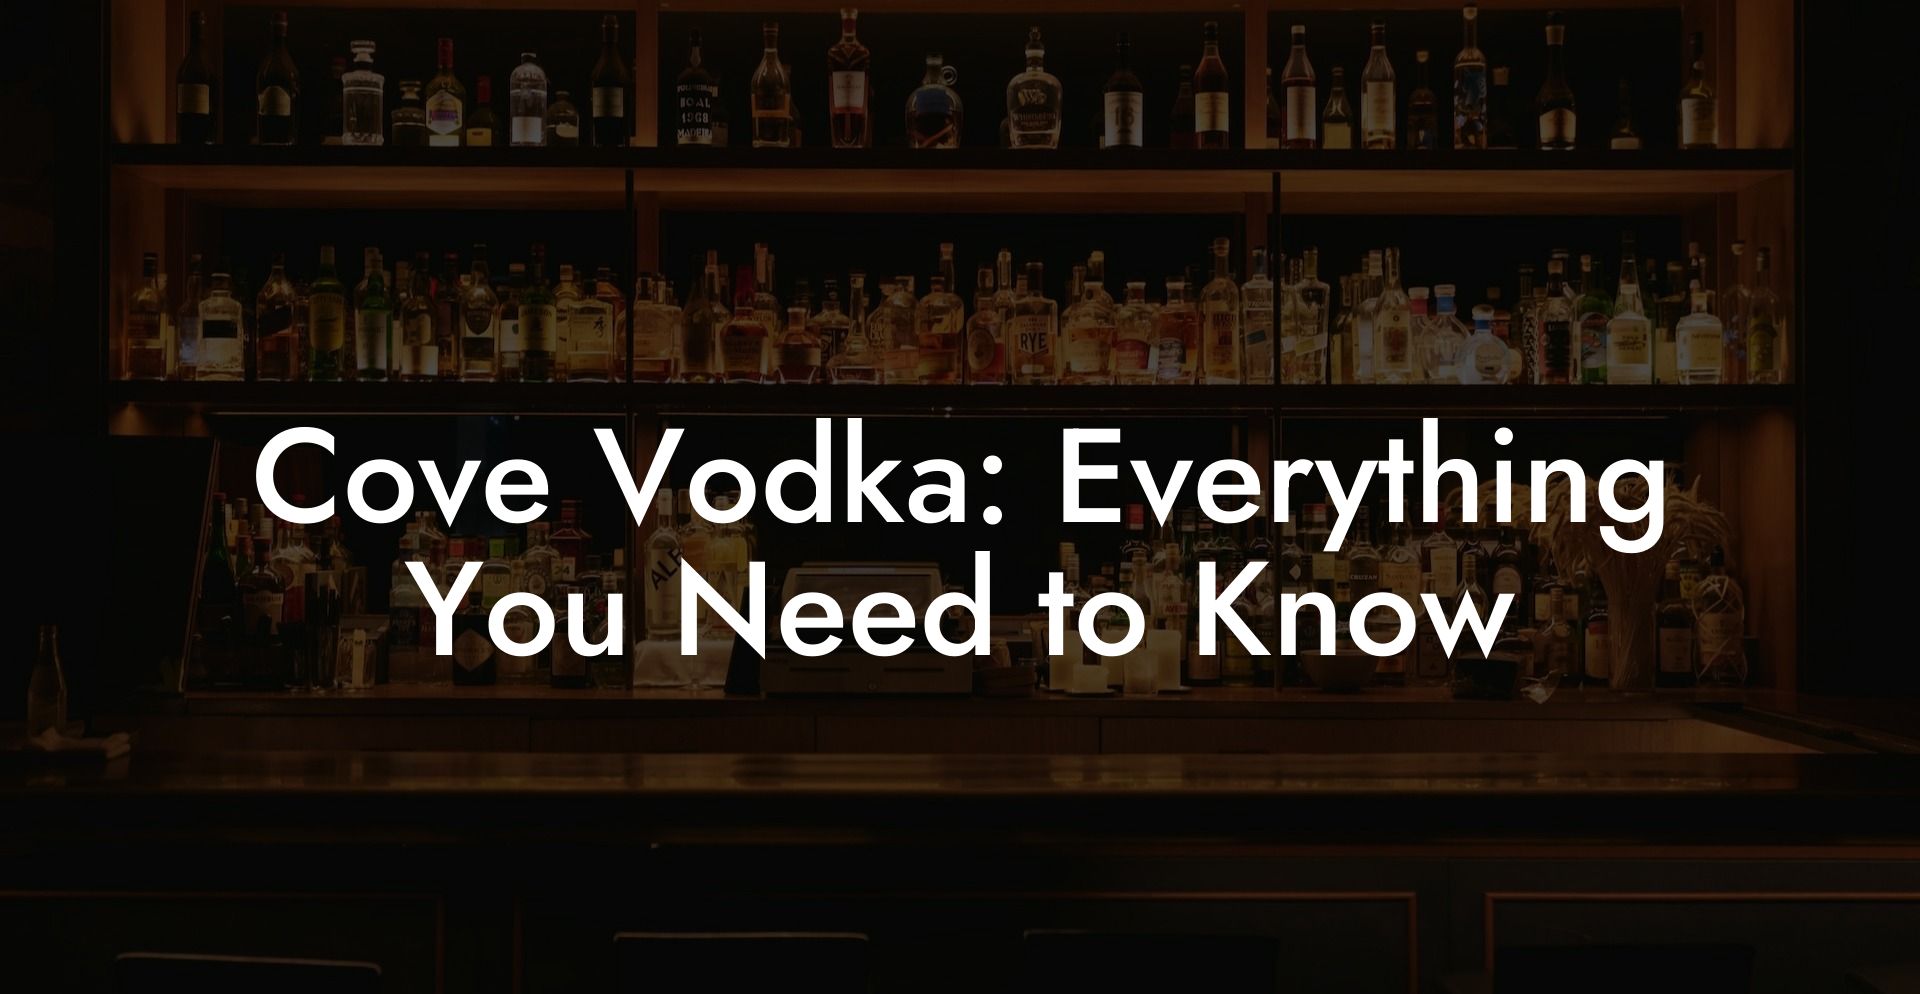 Cove Vodka: Everything You Need to Know